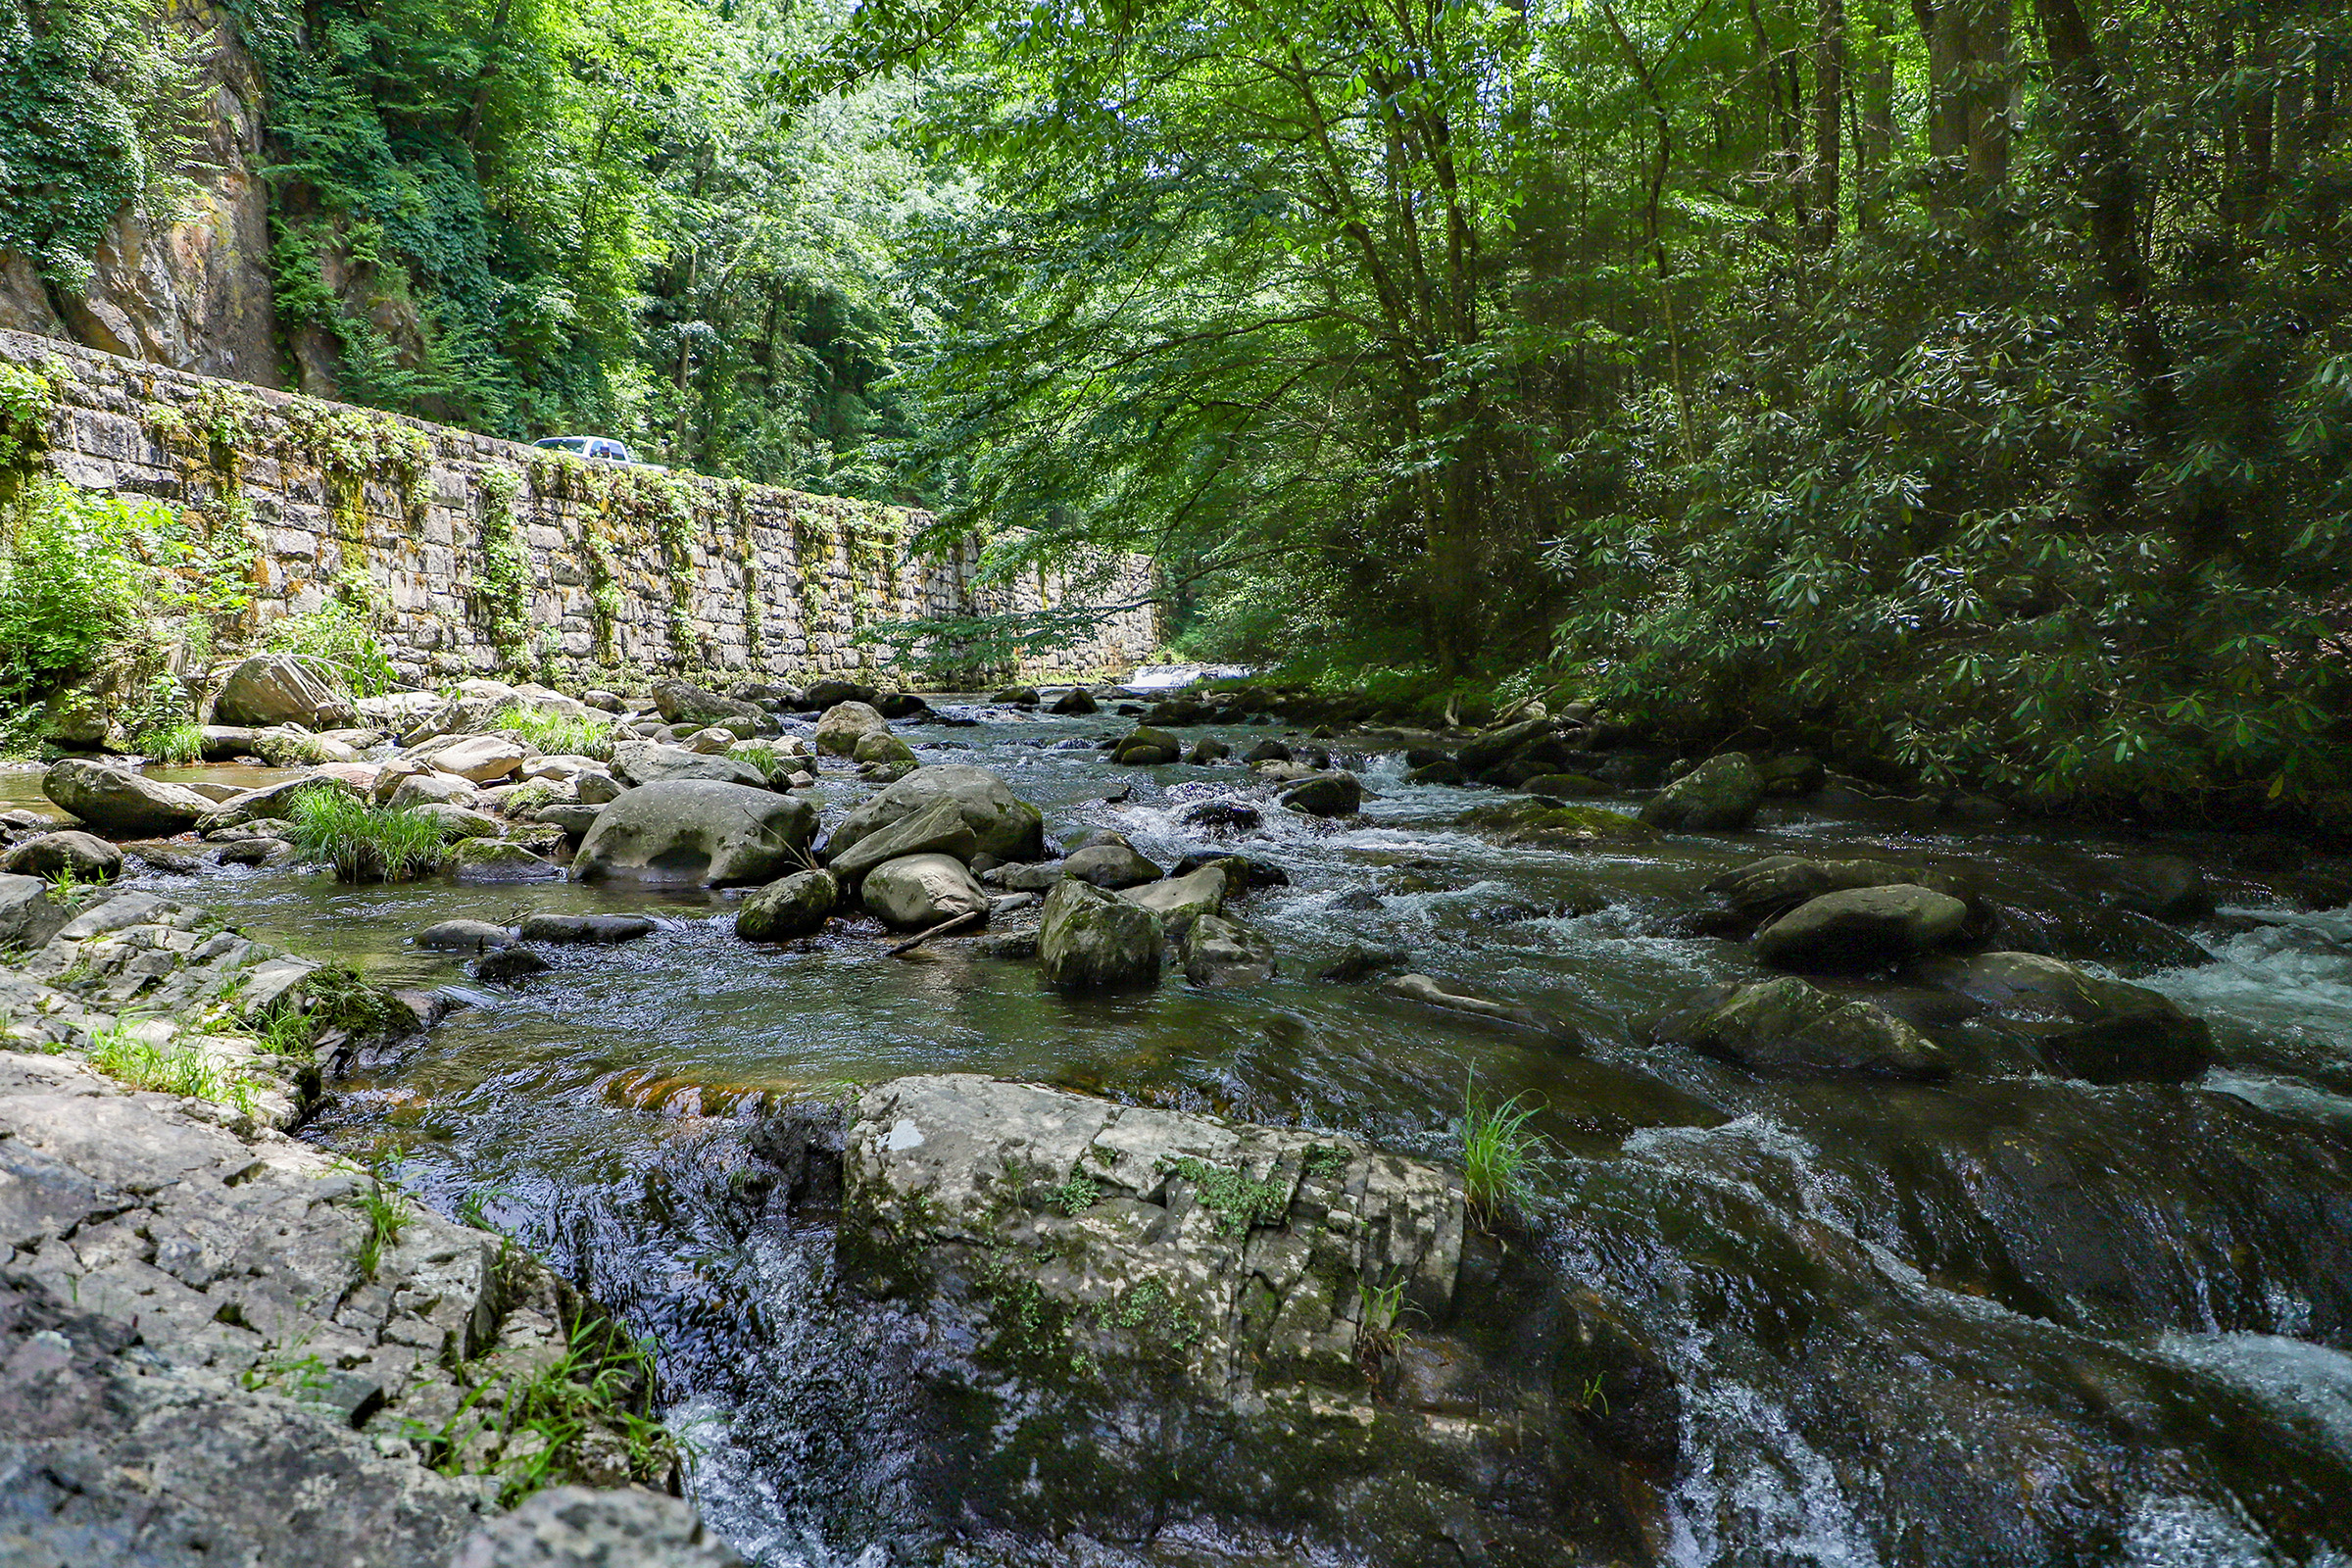 Blount County, Tennessee Offers a Hip Meeting and Convention Destination in the Smoky Mountains